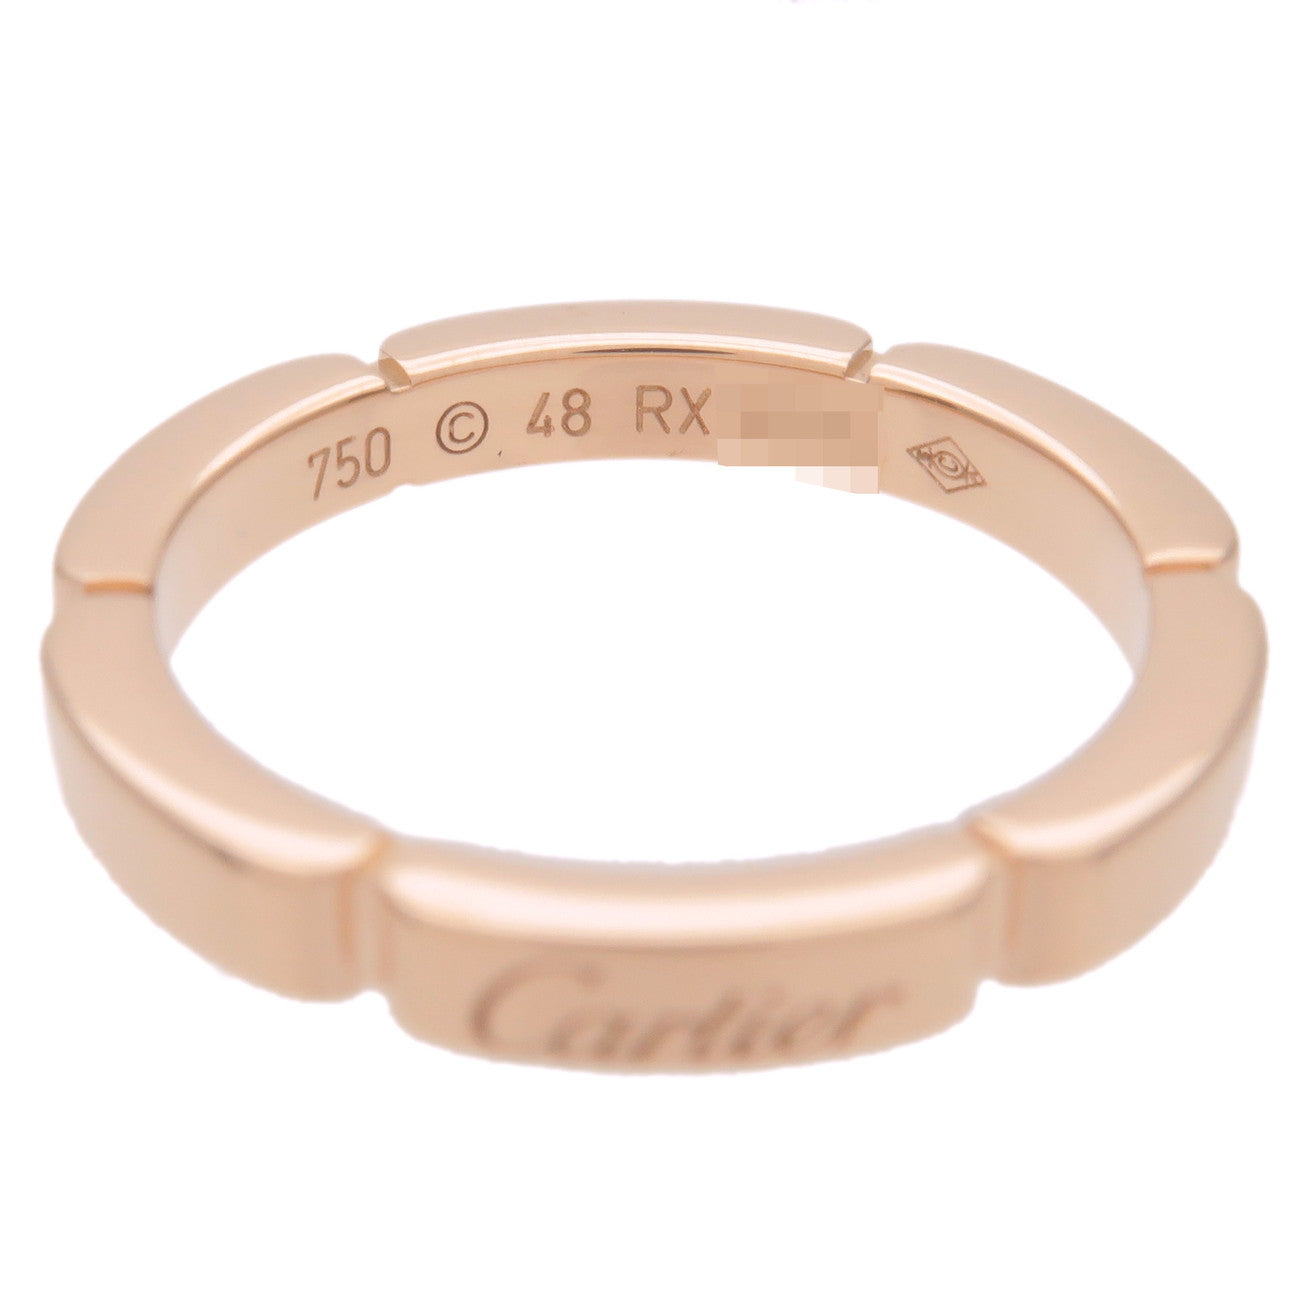 Cartier Maillon Panthere Ring K18 750PG Rose Gold #48 US4.5